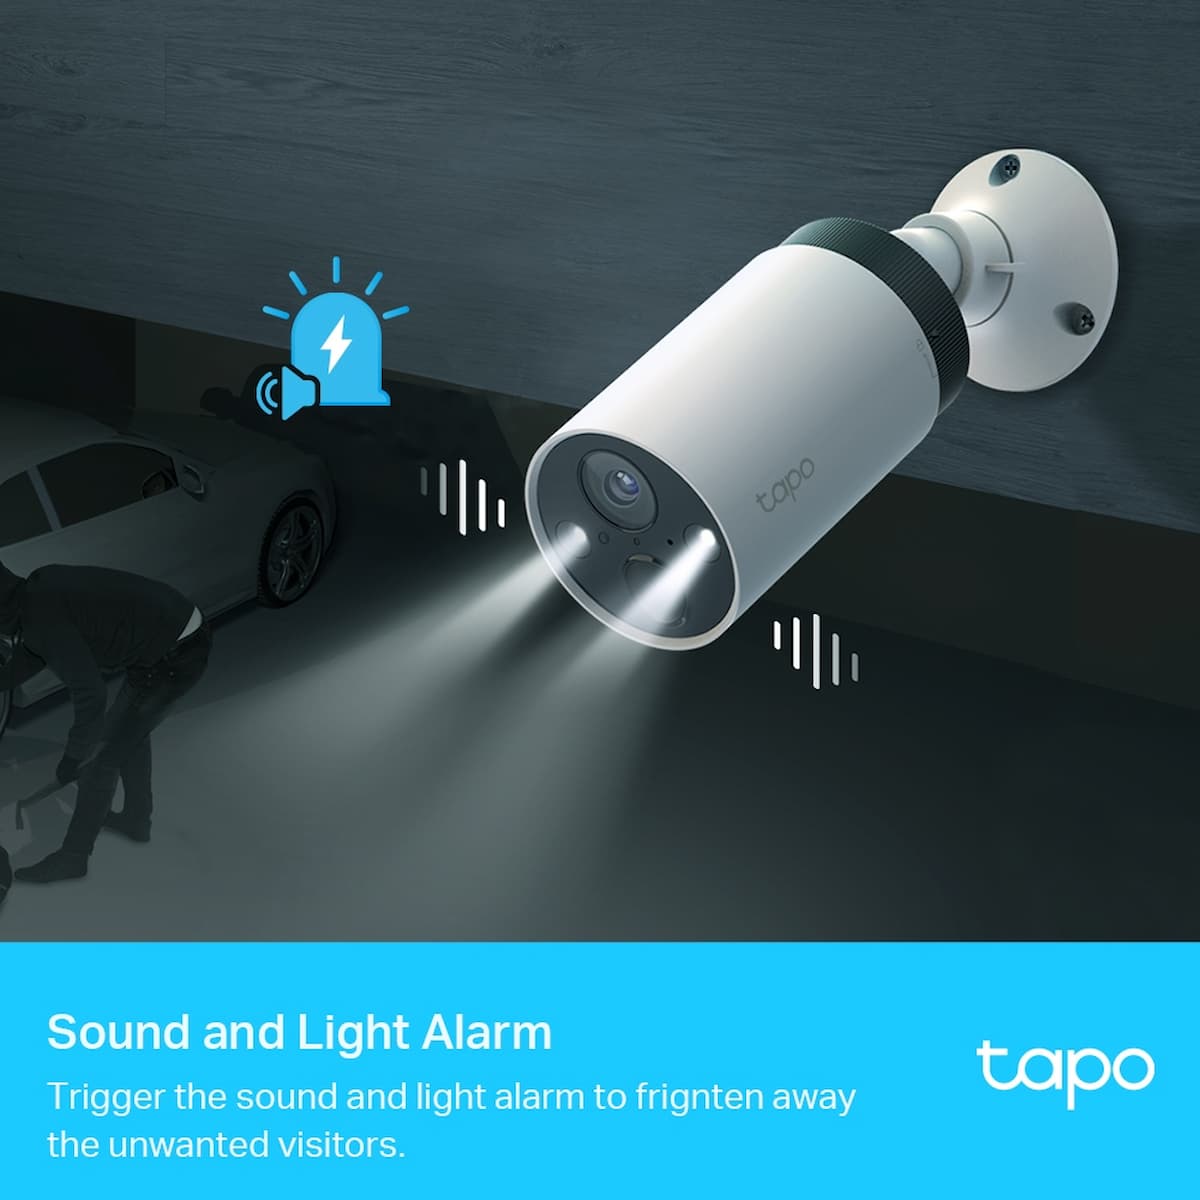 Smart Wire-Free Security Camera System, 2-Camera System | Tapo C420S2